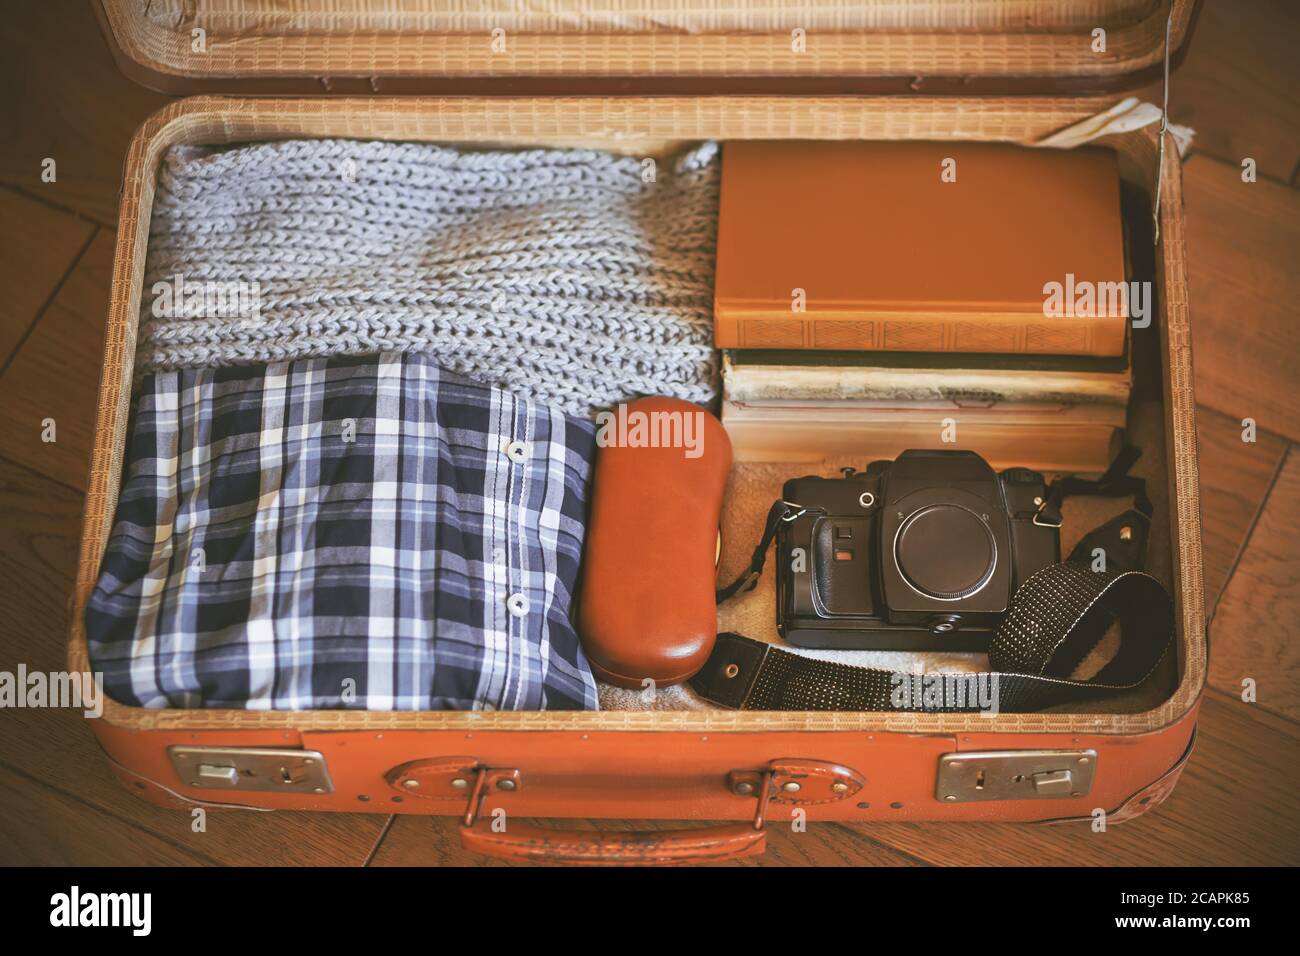 https://c8.alamy.com/comp/2CAPK85/an-open-old-orange-battered-suitcase-that-is-packed-for-the-trip-it-contains-clothing-old-books-a-case-for-glasses-and-a-rare-camera-2CAPK85.jpg